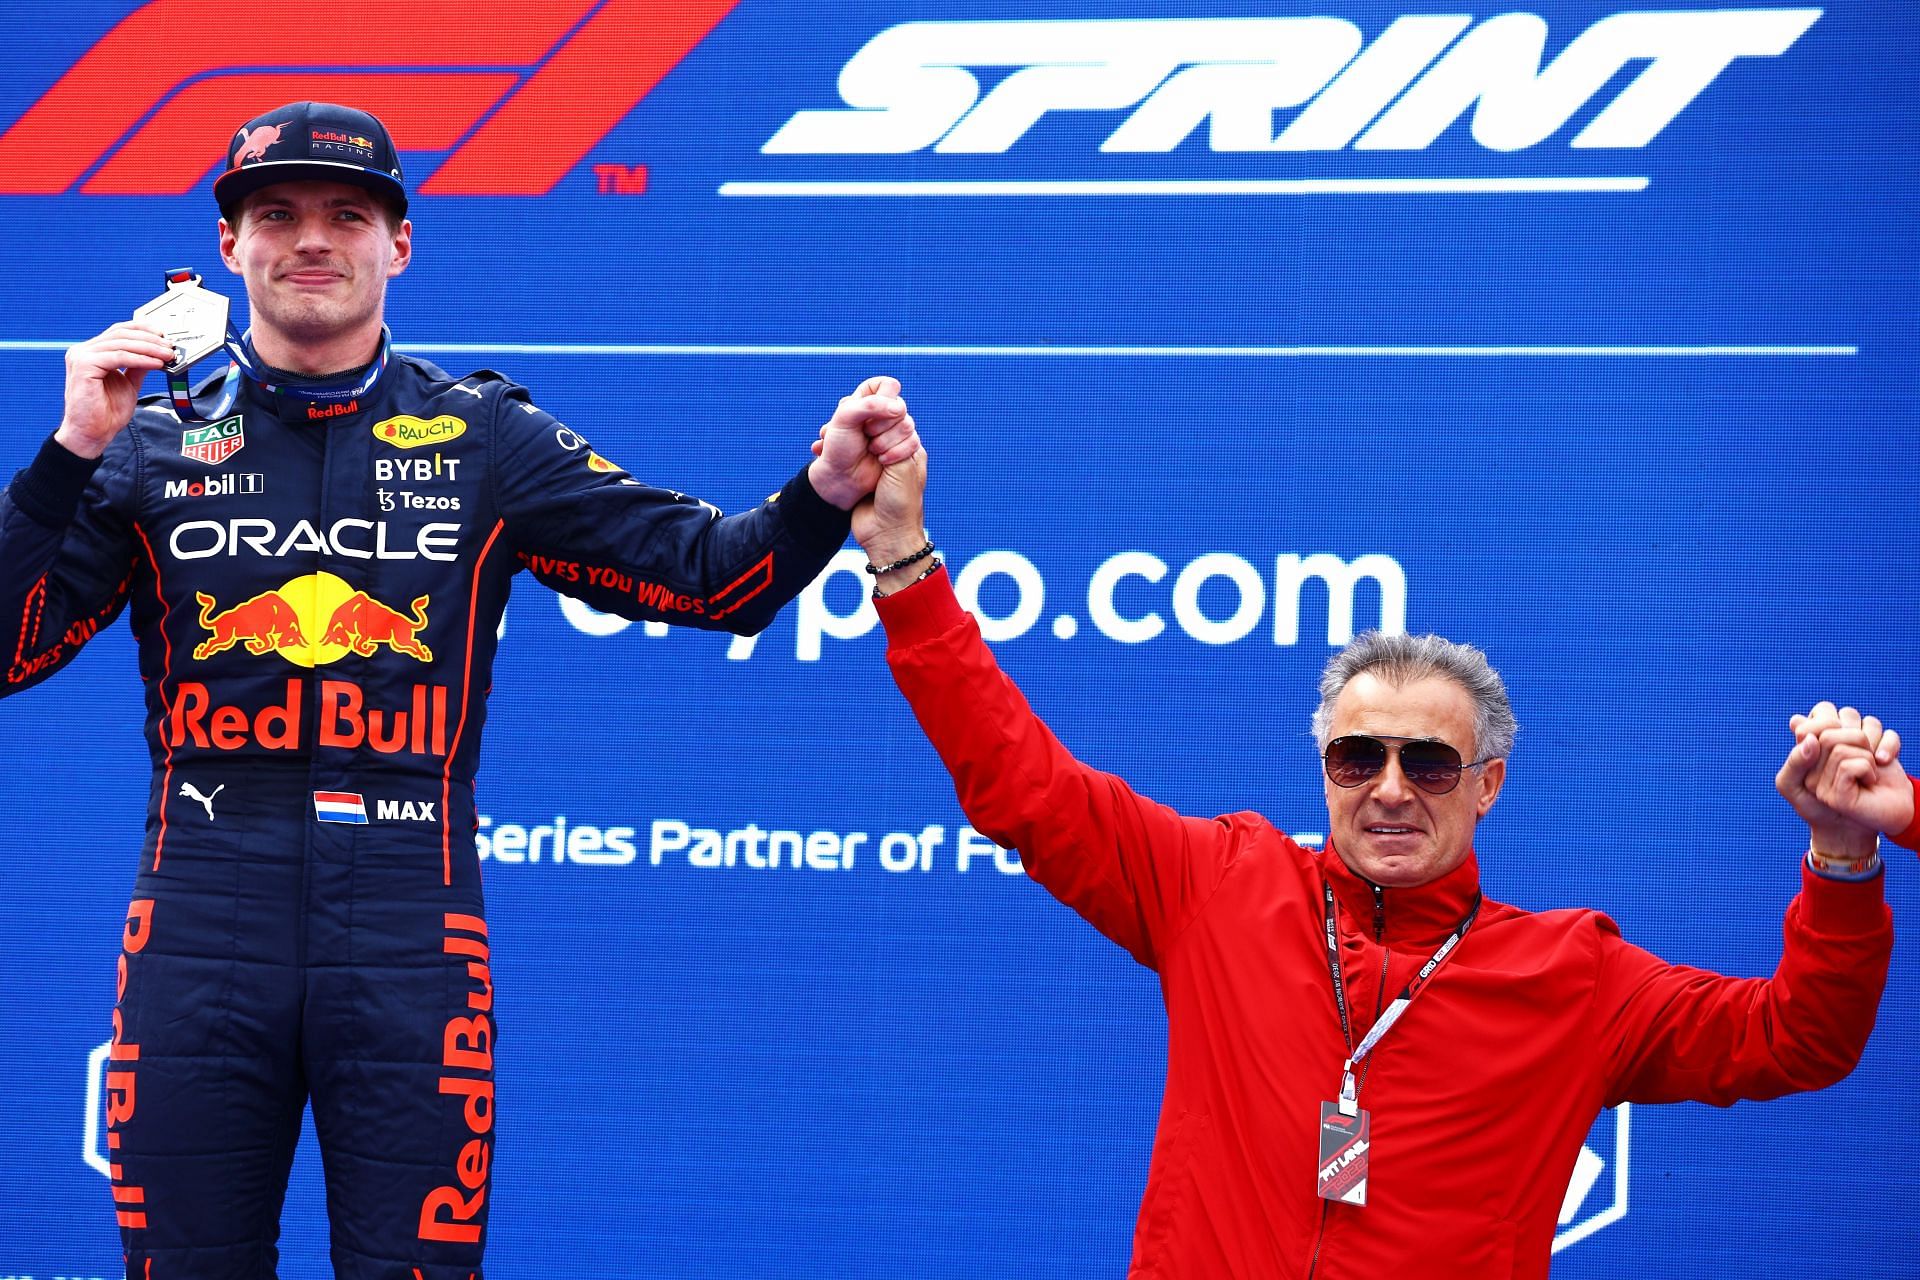 Sprint winner Max Verstappen celebrates with Jean Alesi on the podium at the F1 Grand Prix of Emilia Romagna (Photo by Mark Thompson/Getty Images)